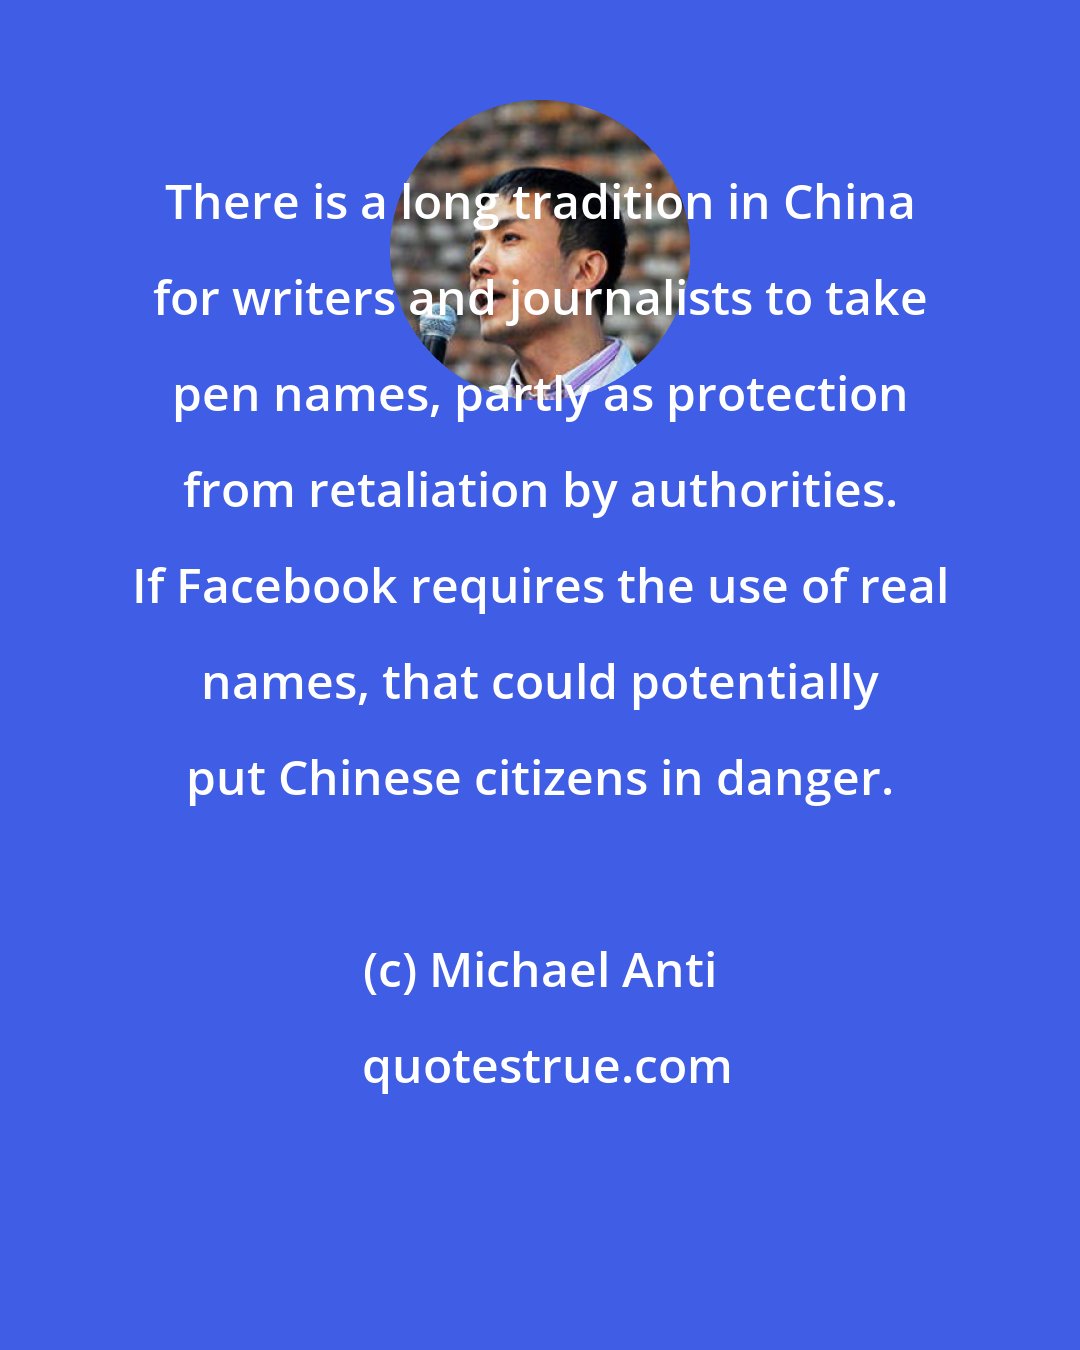 Michael Anti: There is a long tradition in China for writers and journalists to take pen names, partly as protection from retaliation by authorities. If Facebook requires the use of real names, that could potentially put Chinese citizens in danger.